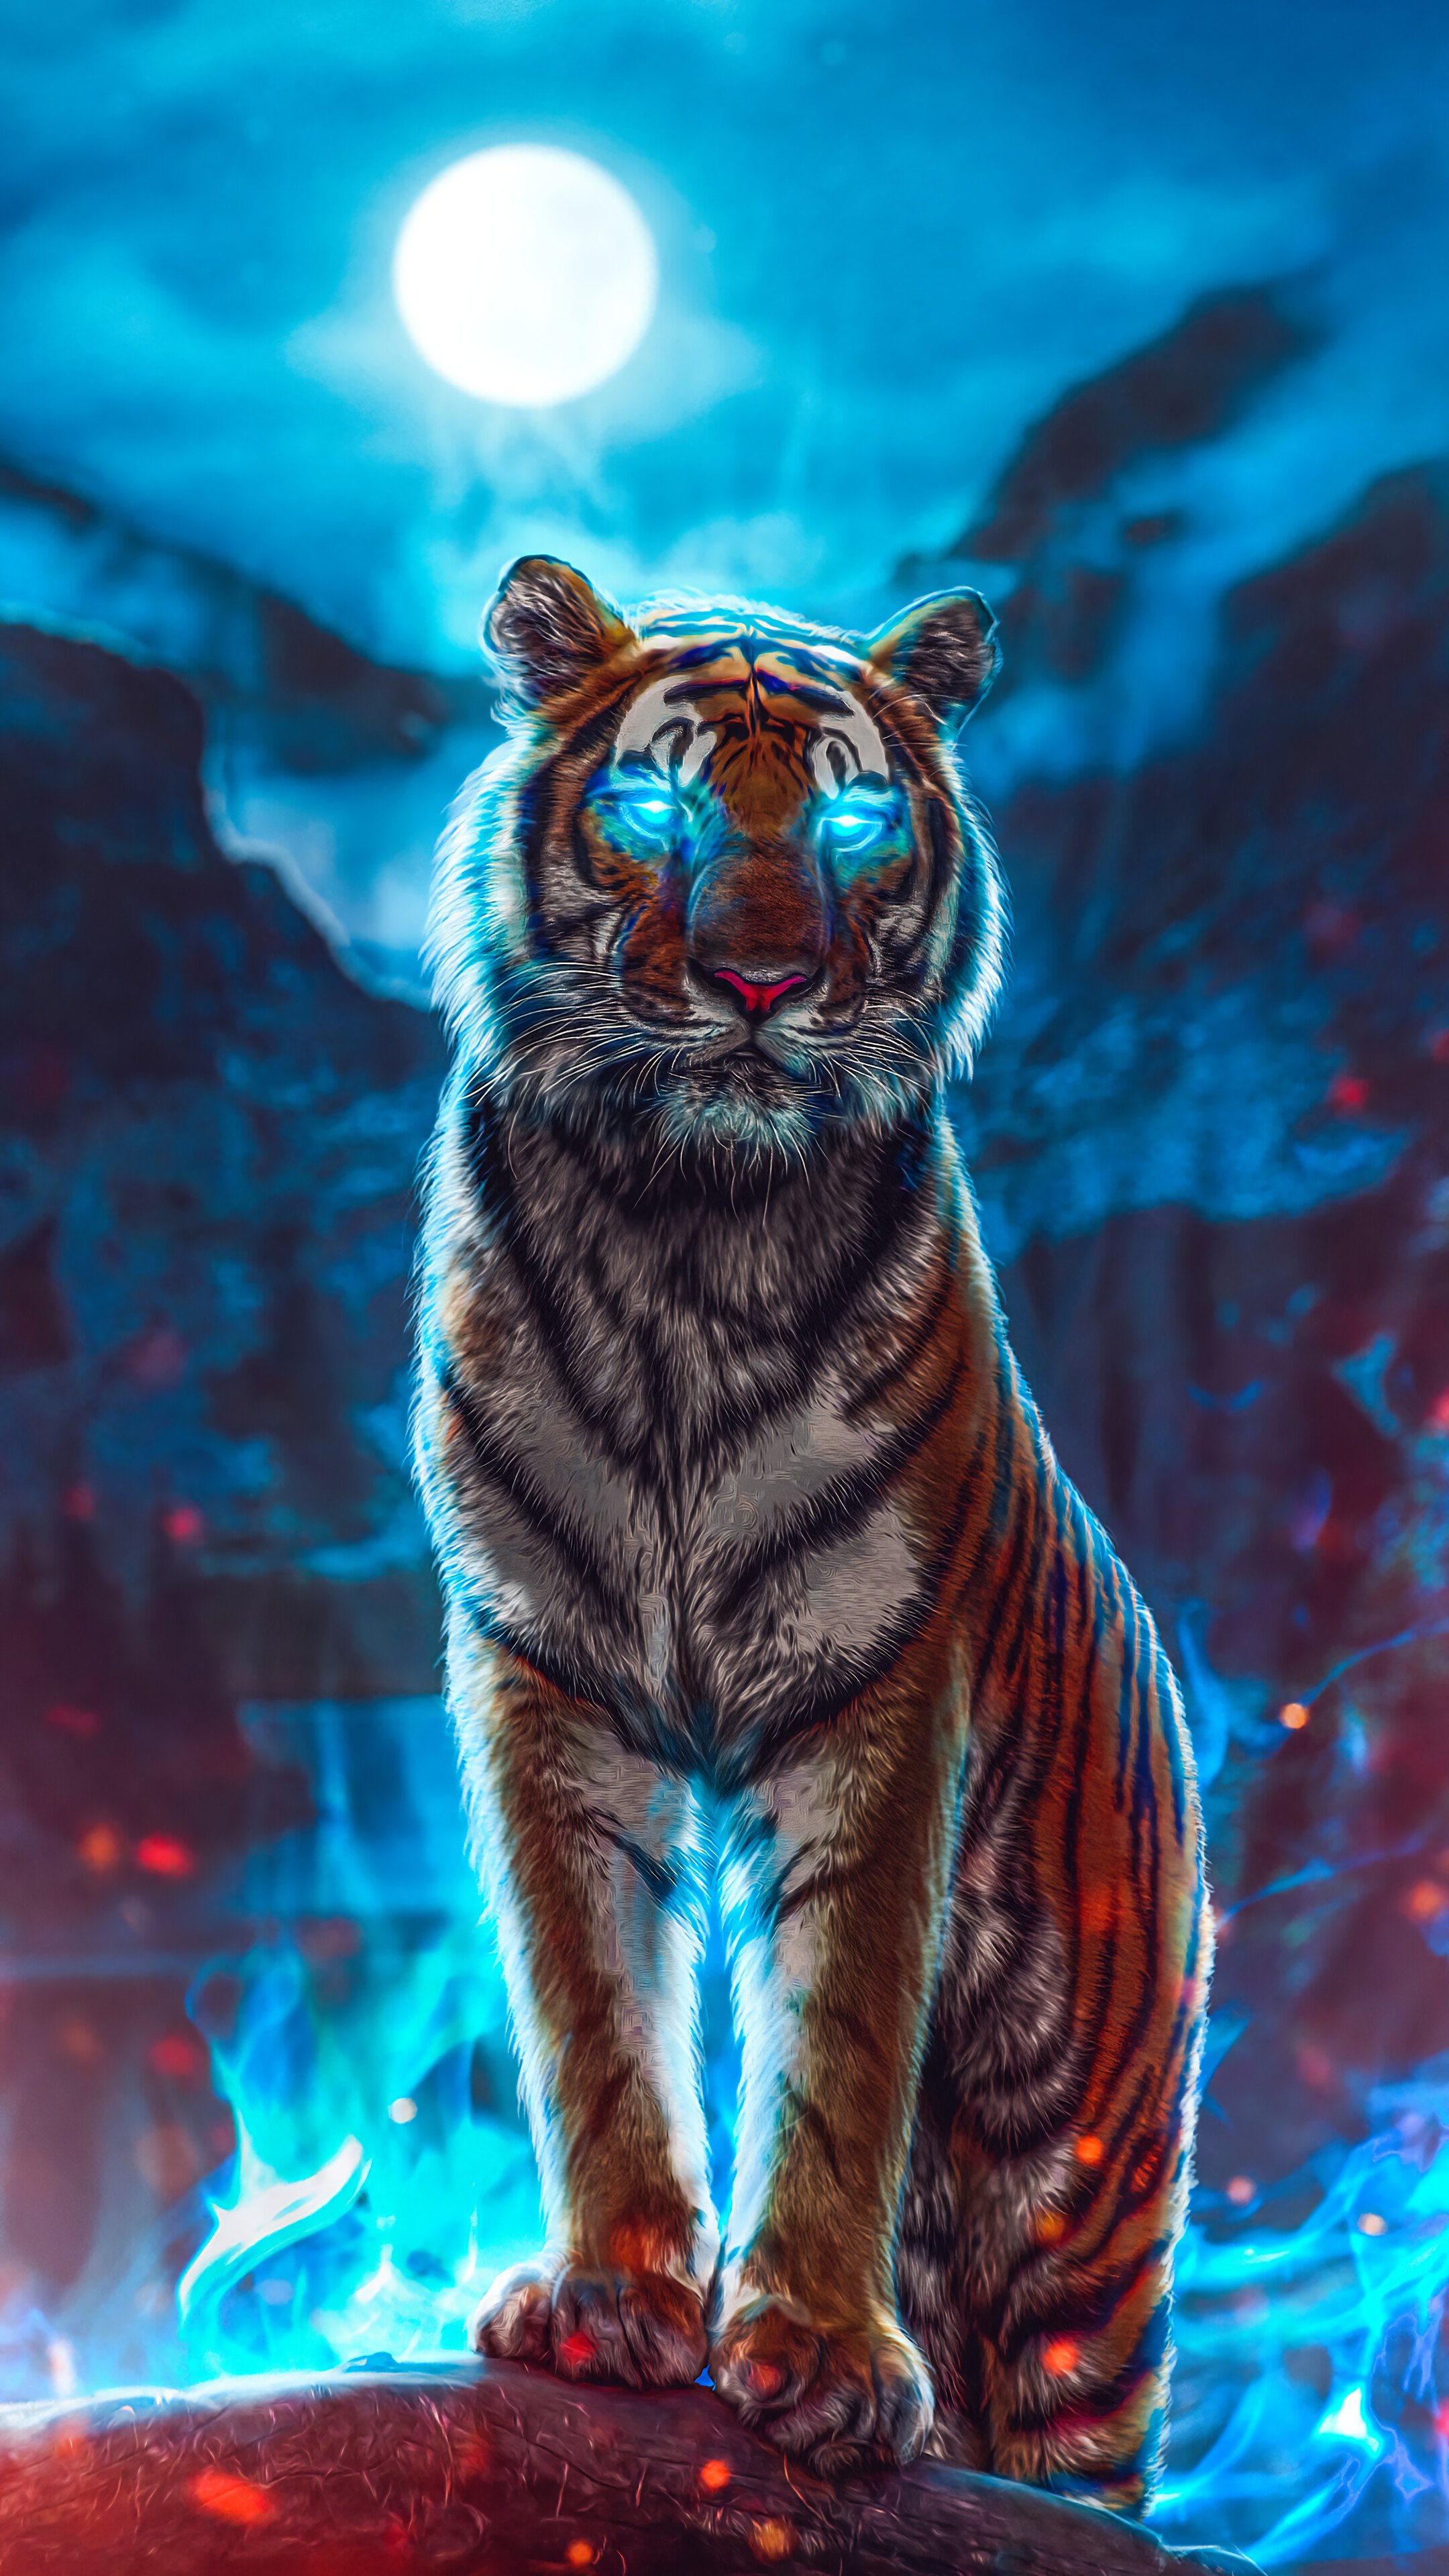 Tiger, Glowing, Eyes, 4K phone HD Wallpaper, Image, Background, Photo and Picture. Mocah HD Wallpaper